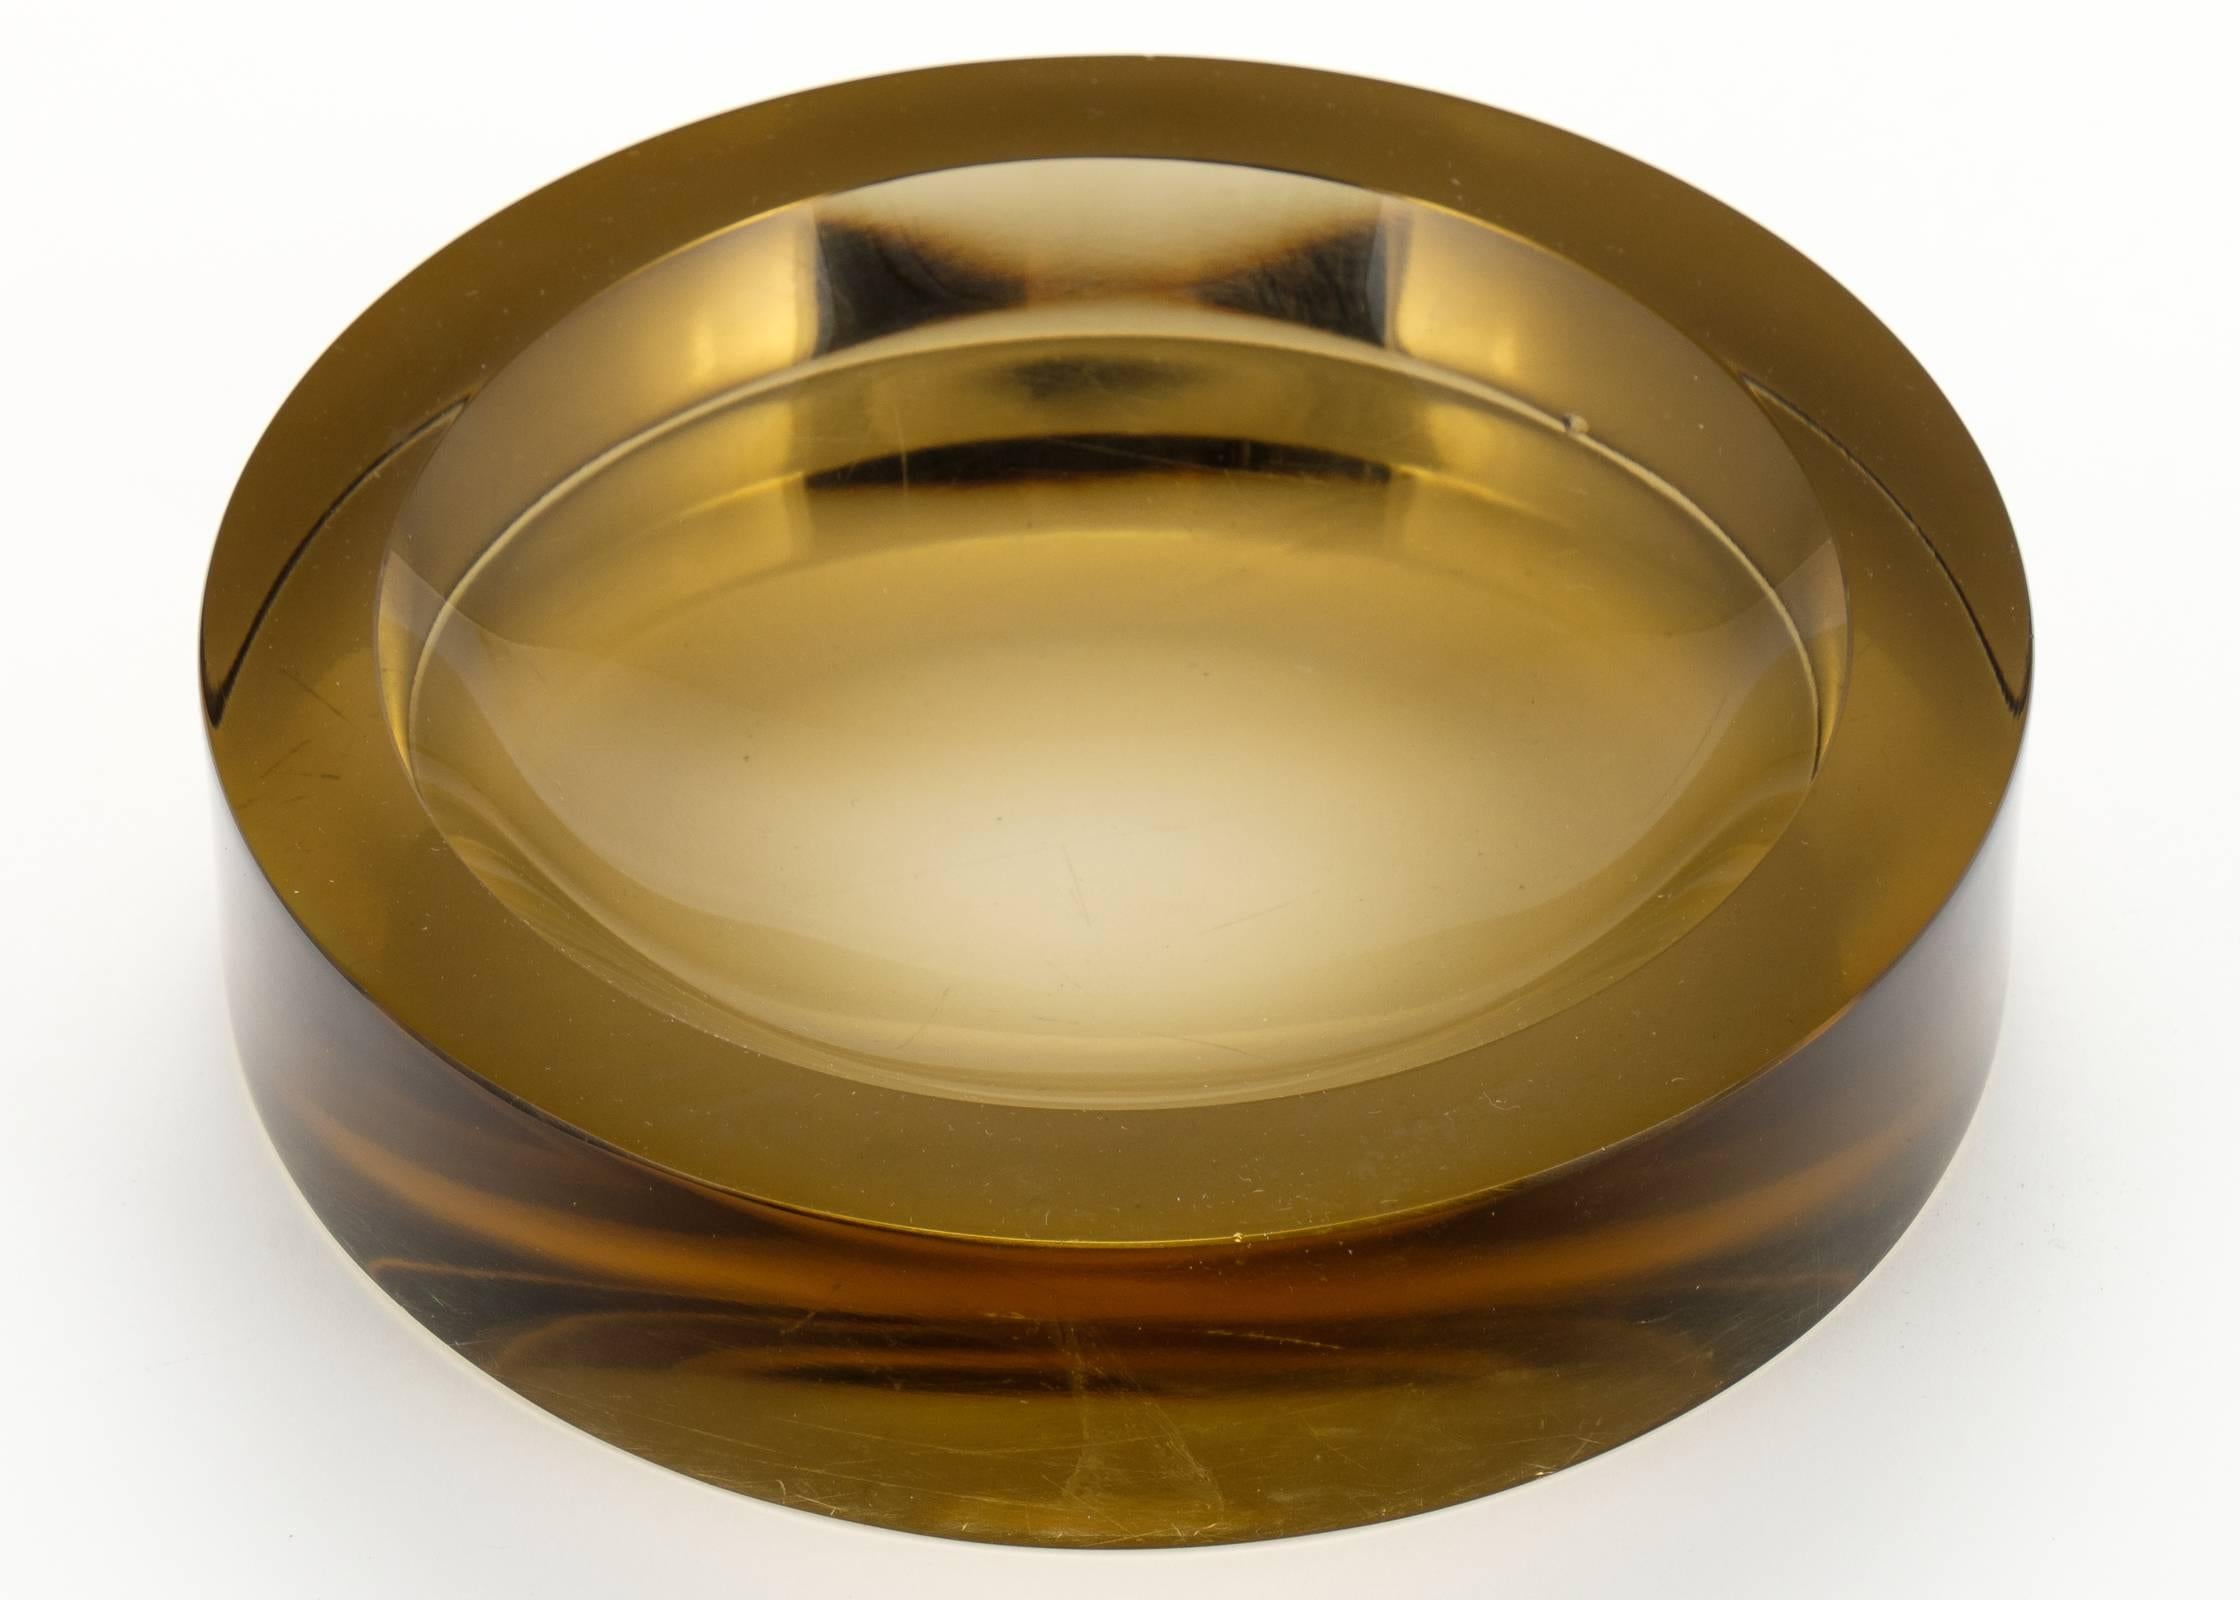 Italian Murano amber glass bowl or ashtray. Very mod, a great look in the high-quality glass we cherish from Murano, Italy.